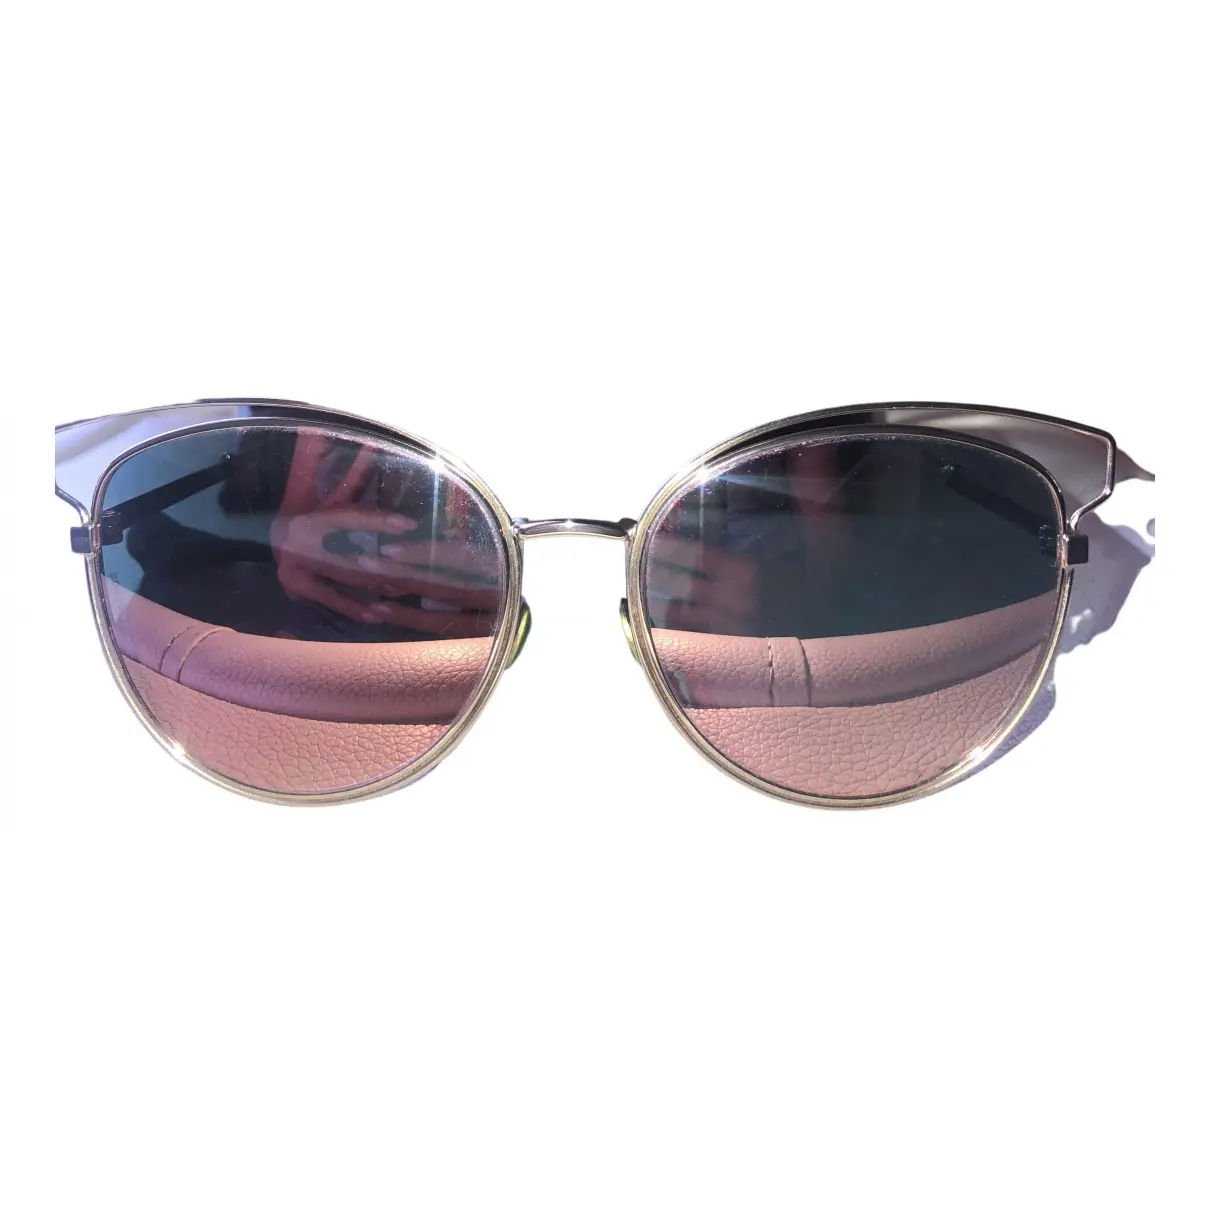 Sideral 2 oversized sunglasses Dior